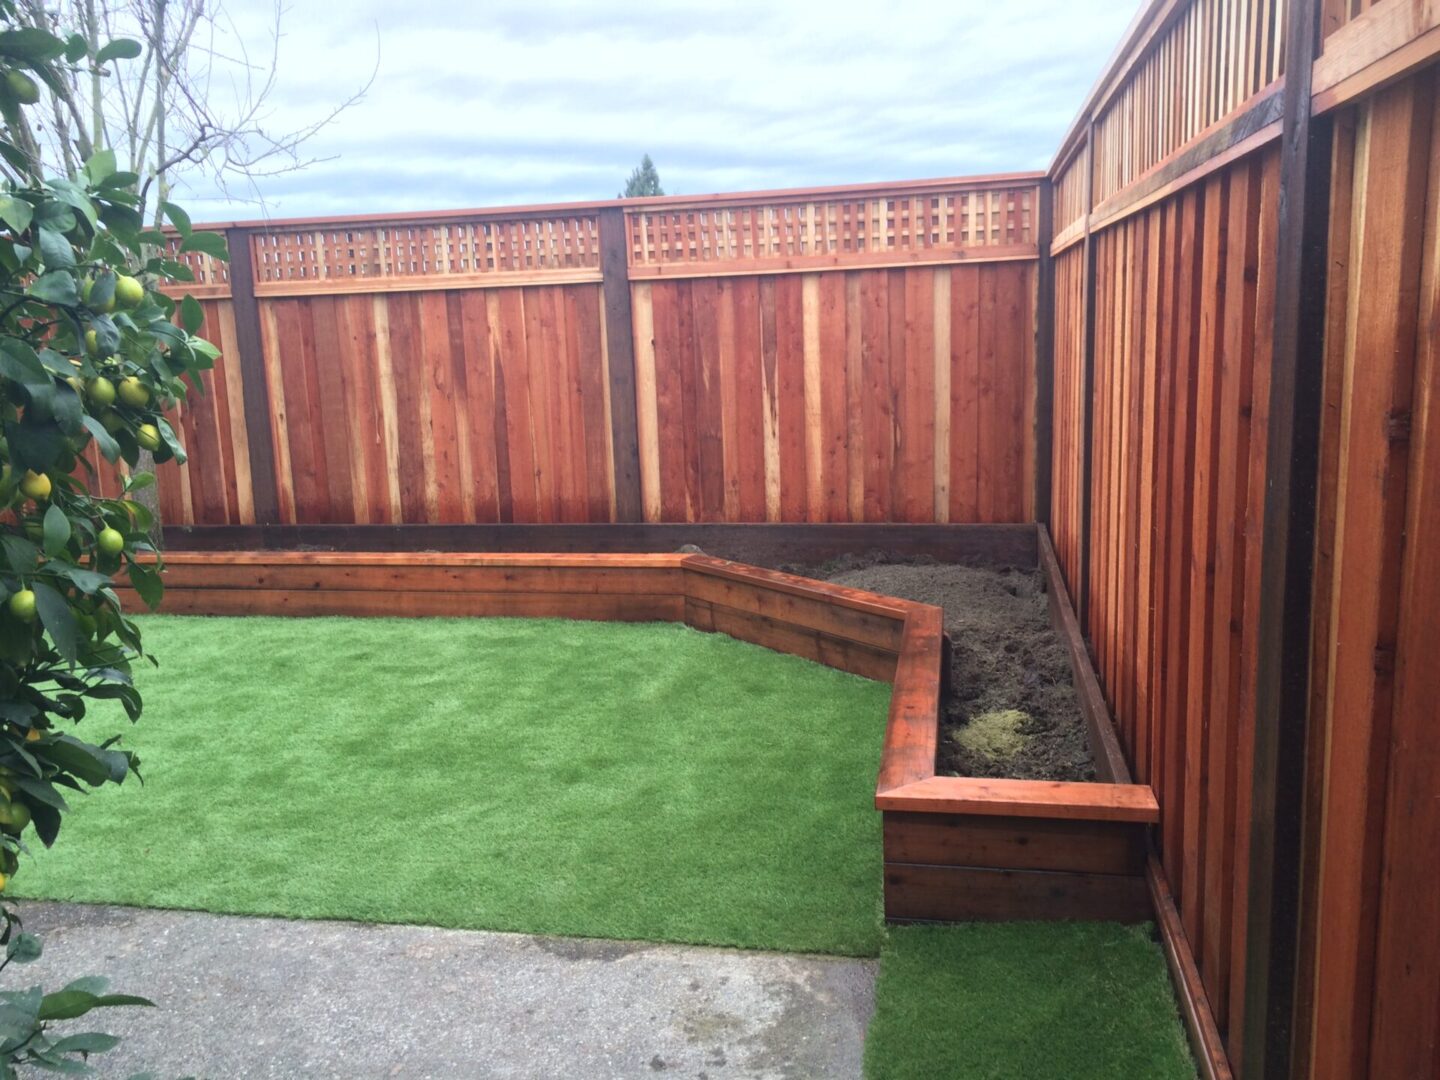 Artificial lawn landscaping service by Guys Yard Design in Sonoma, CA